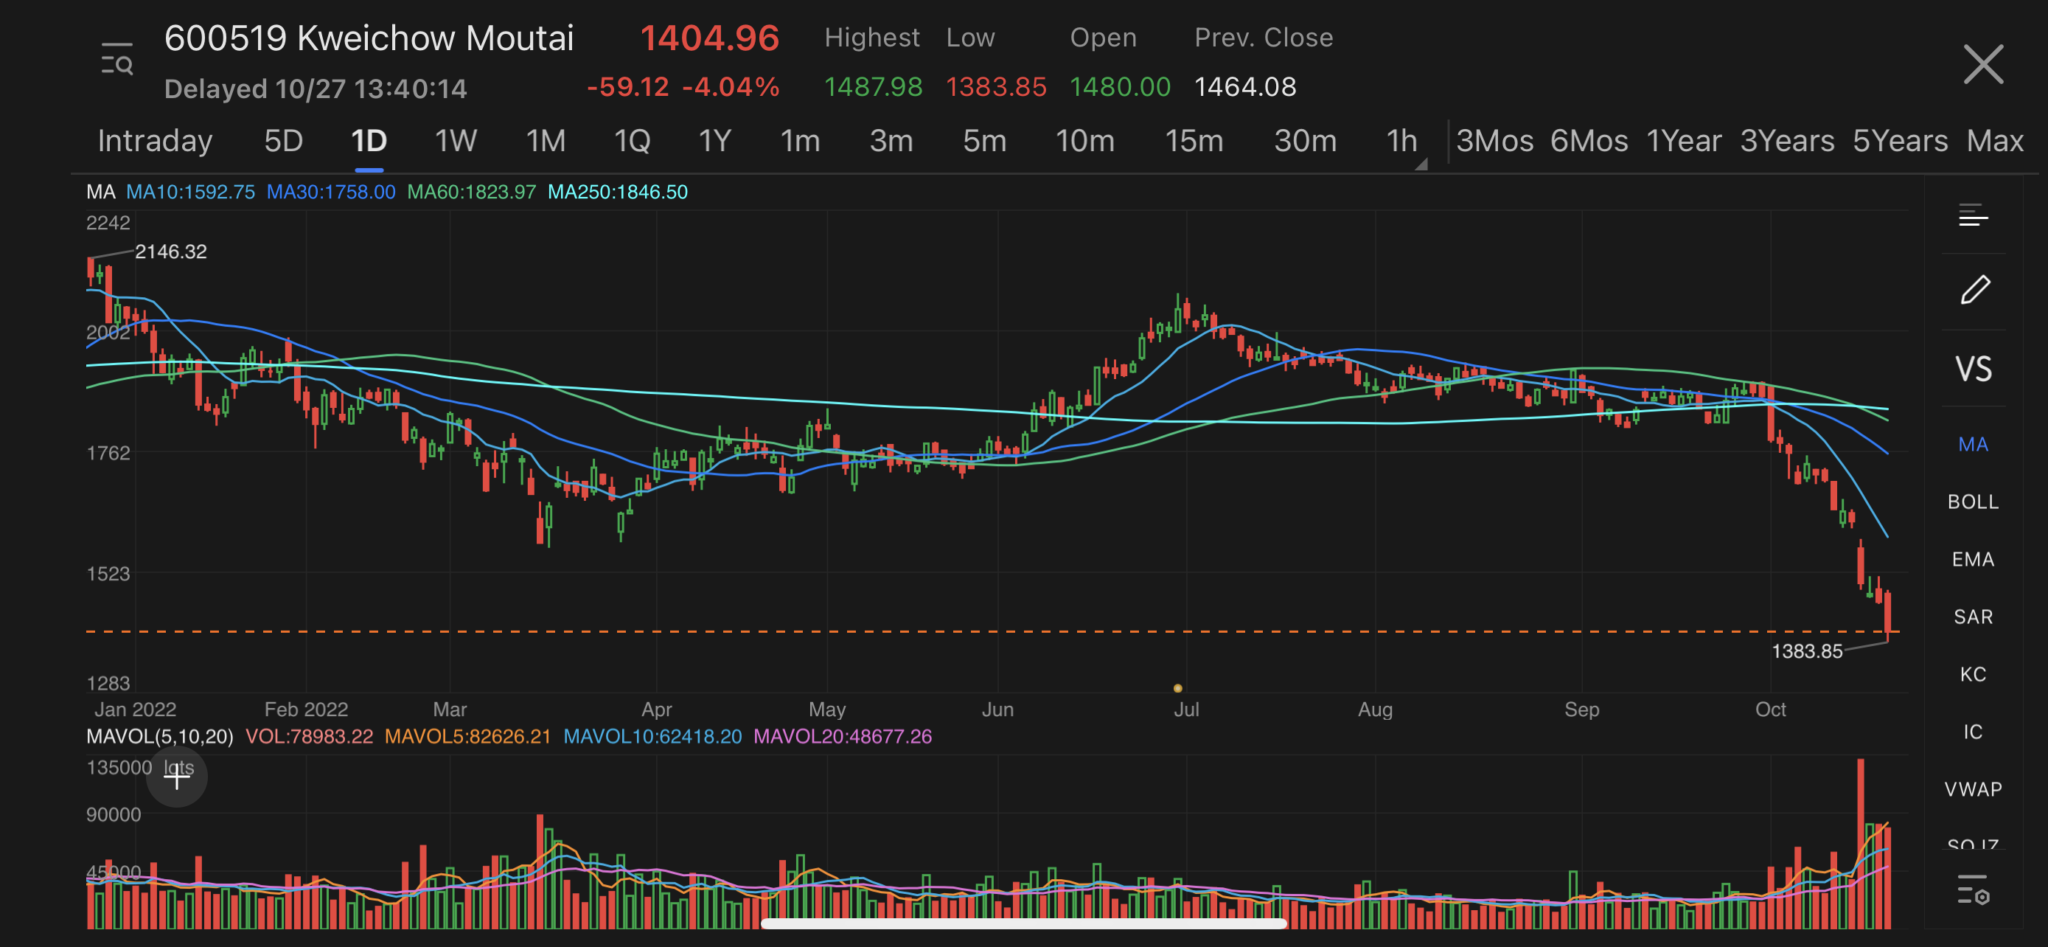 Chinese liquor makers continue to slide, Kweichow Moutai drops below 1,400 mark for first time since Jun 2020